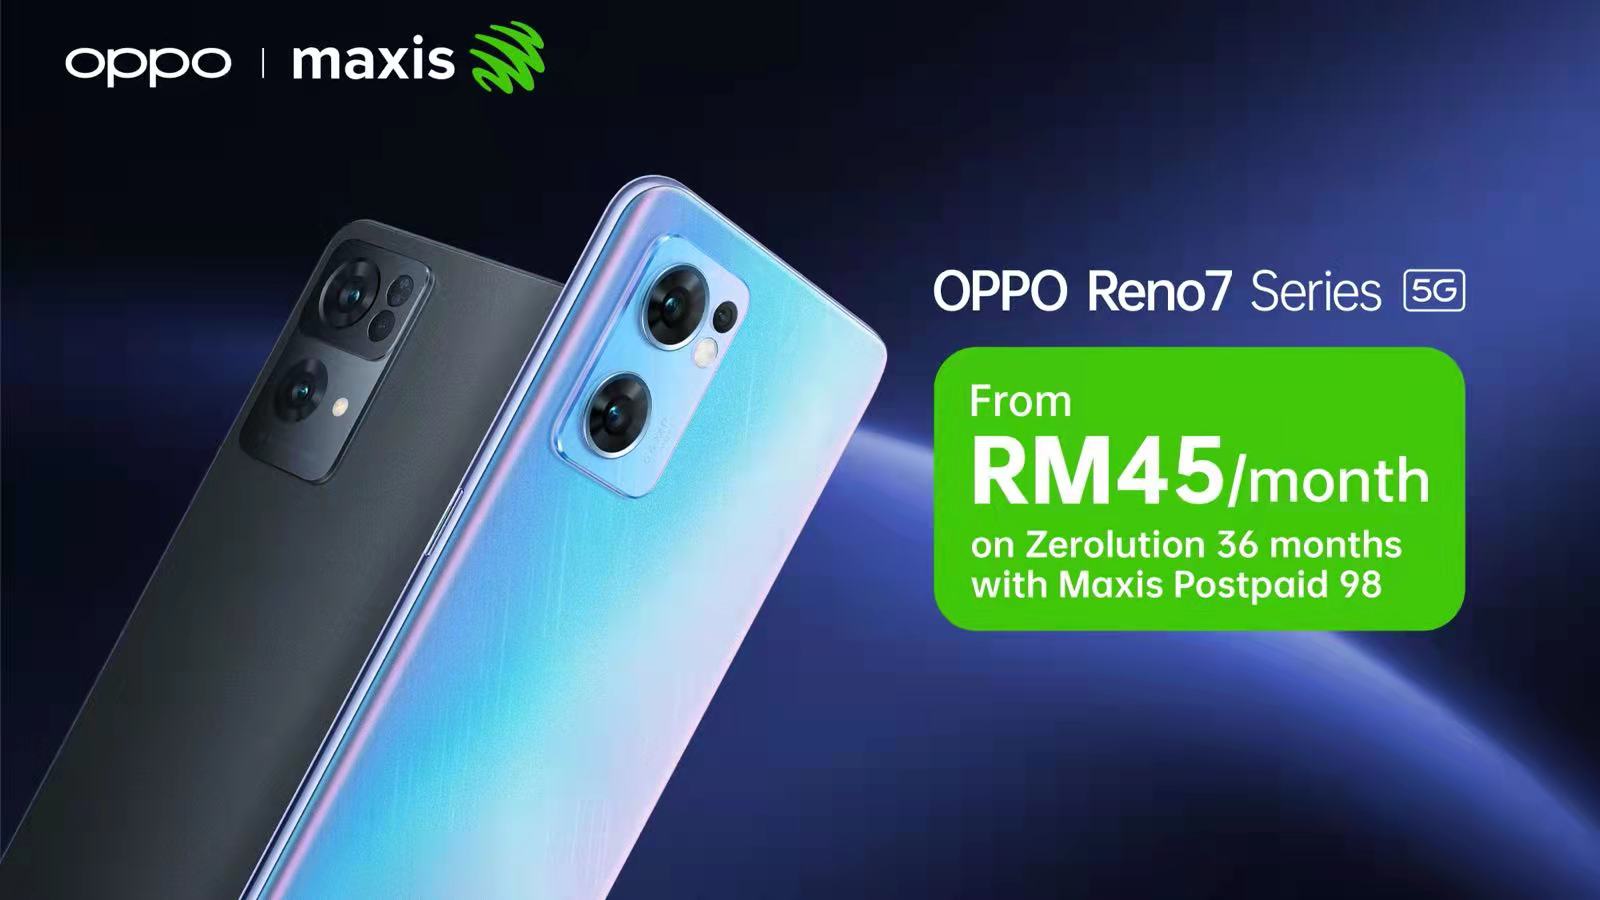 OPPO RENOGRAPHERS - Calling Local Talents for Partnership Opportunities with the OPPO Reno7